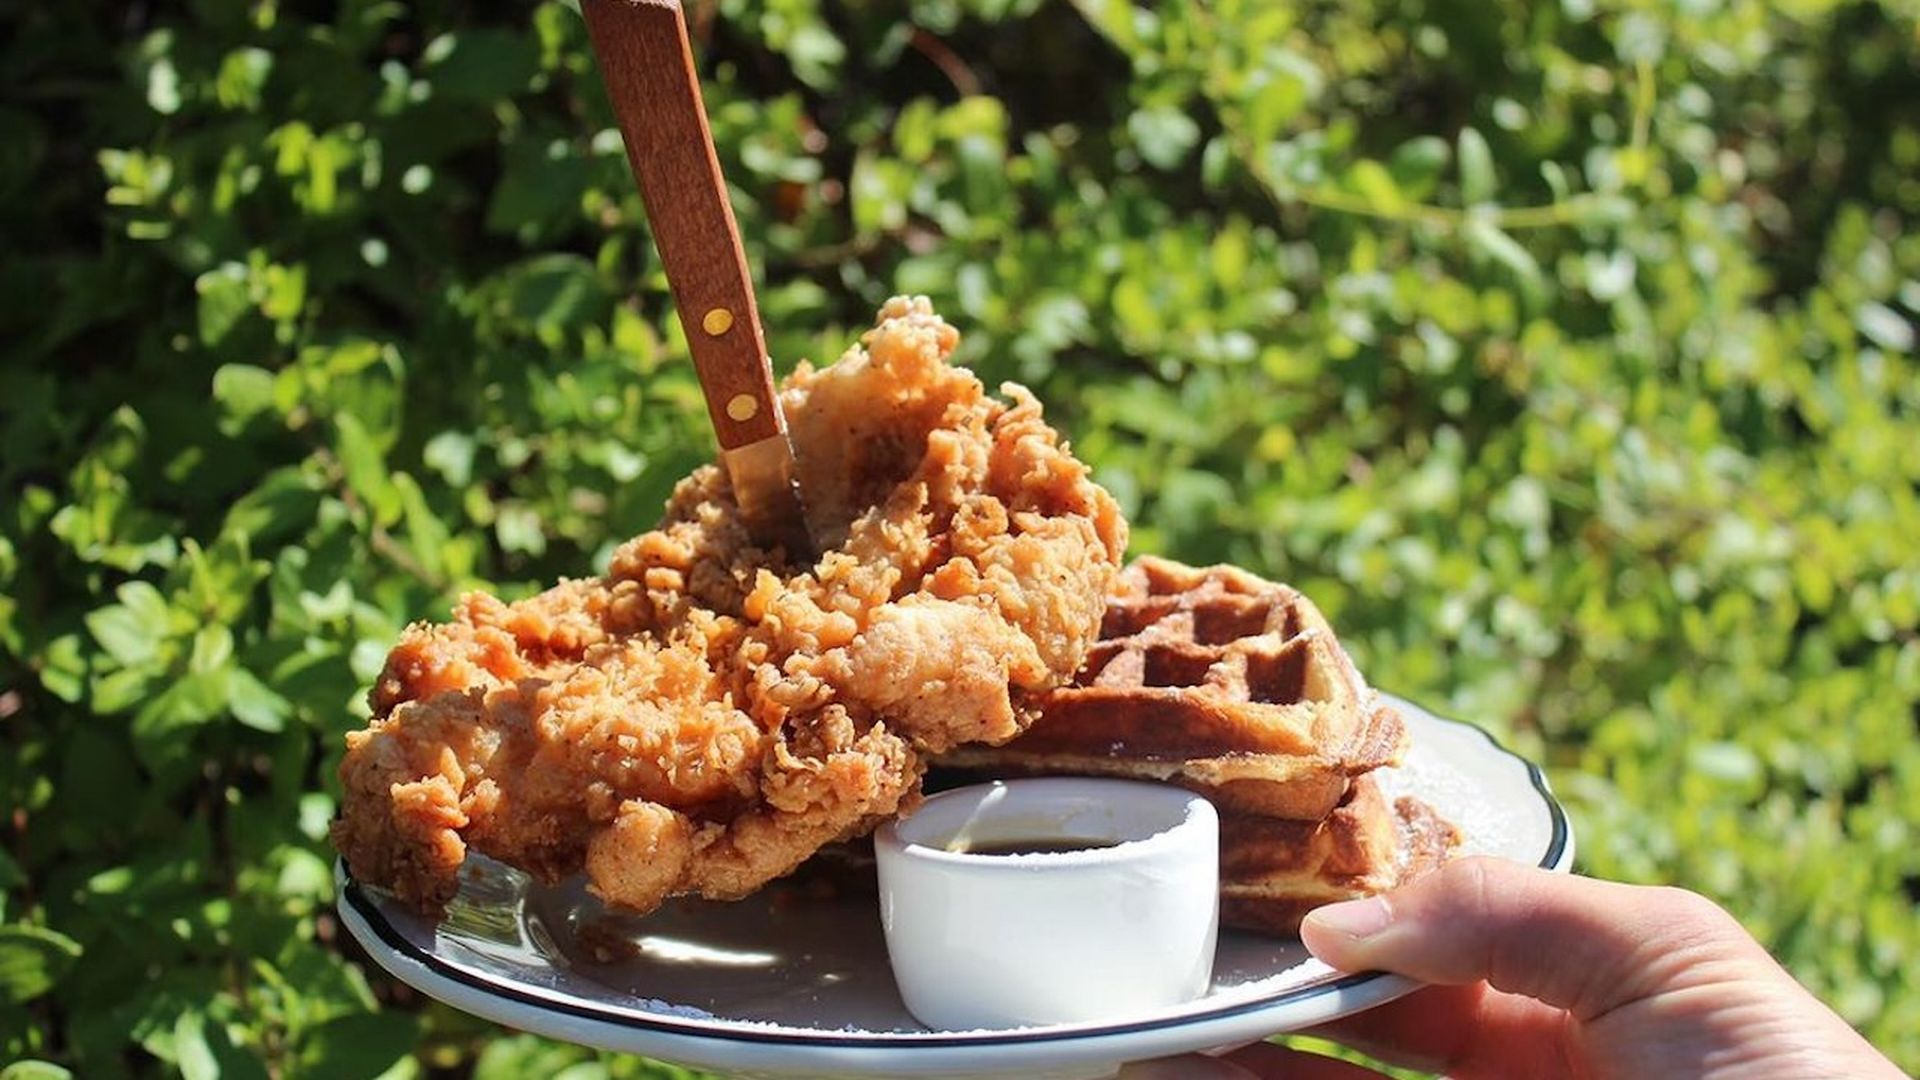 A photo of a hand holding a plate of fried chicken and waffles.